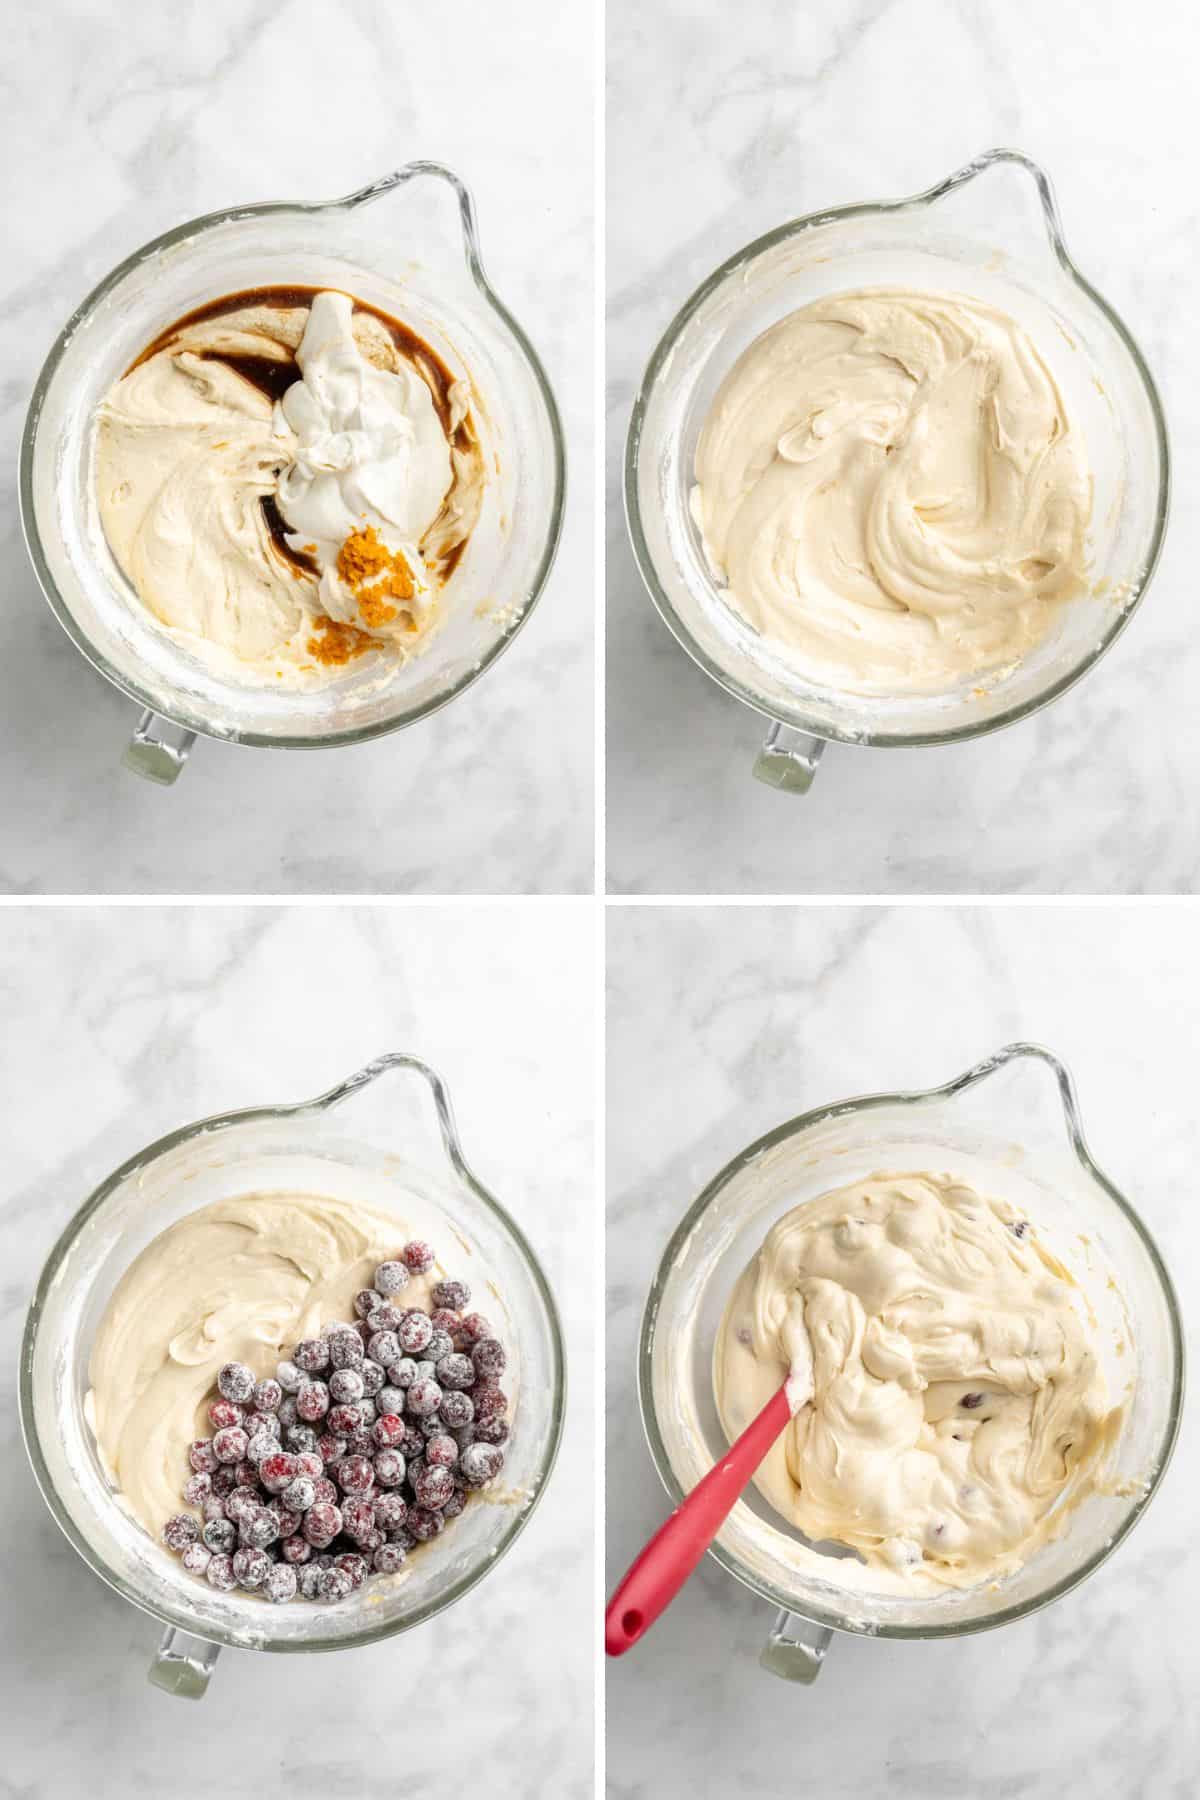 A collage showing mixing the cake batter for a cranberry and orange cake.